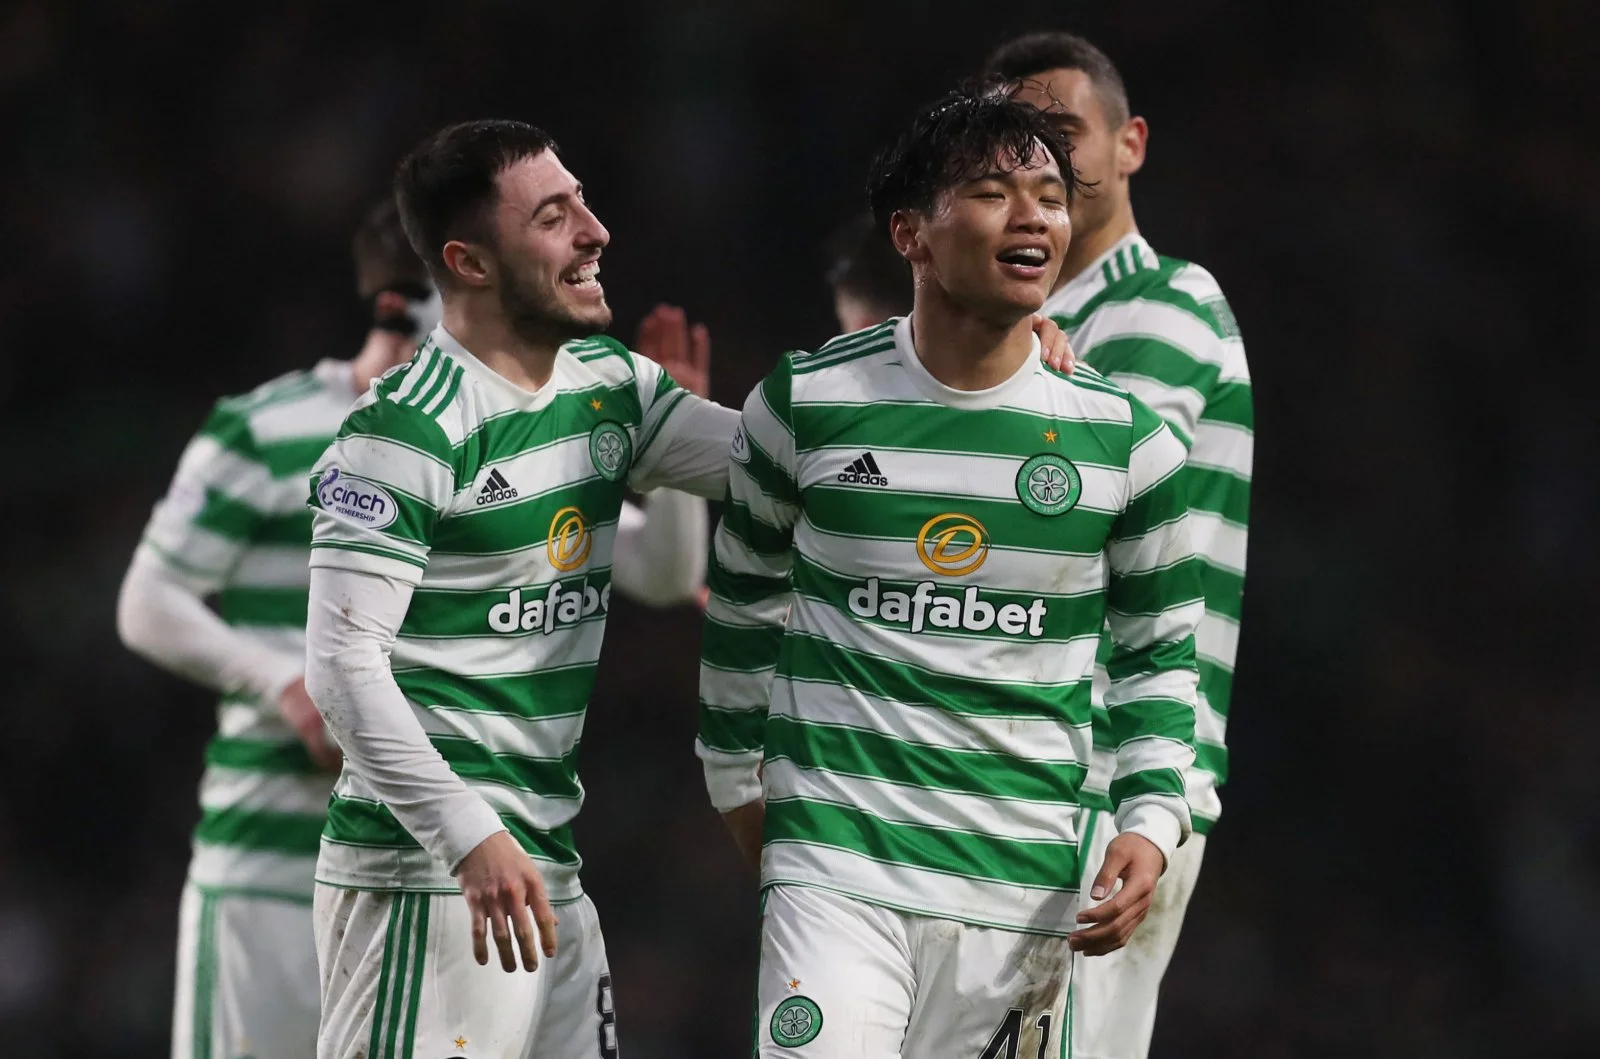 JUST NOW: Celtic chairman Peter Lawwell speaks out on concerning fixture issue…